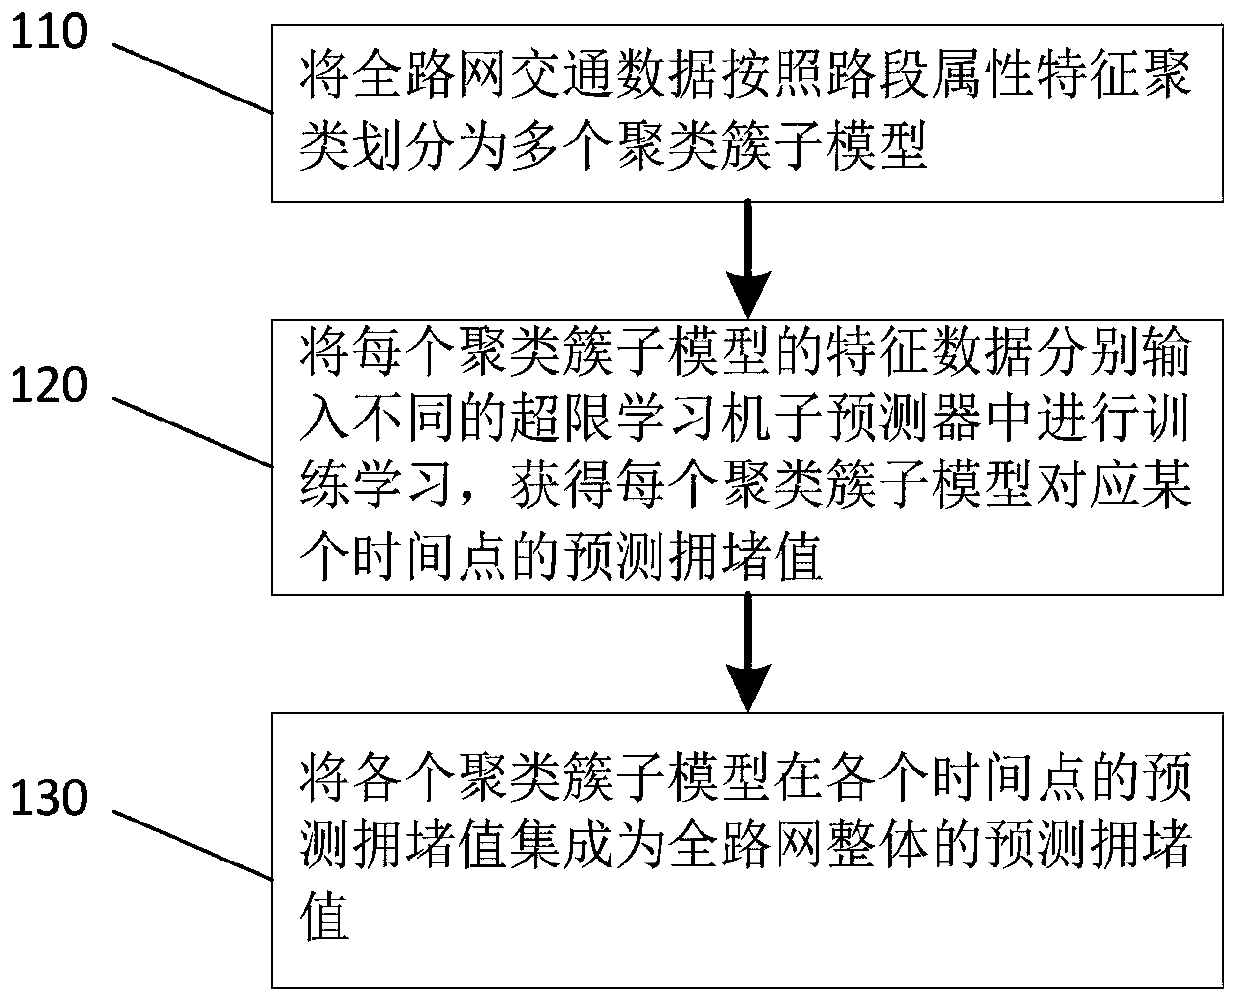 Traffic congestion prediction method and system